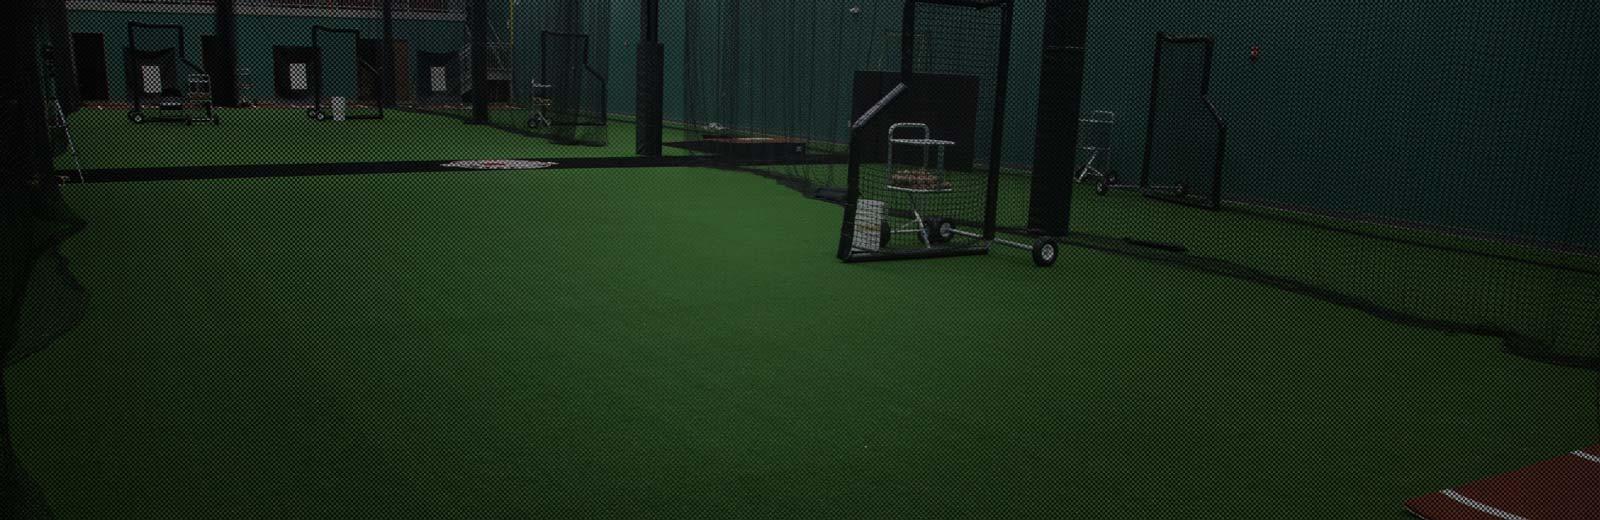 Indoor Turf for Athletic Facilities, Gyms, and Training Centers 